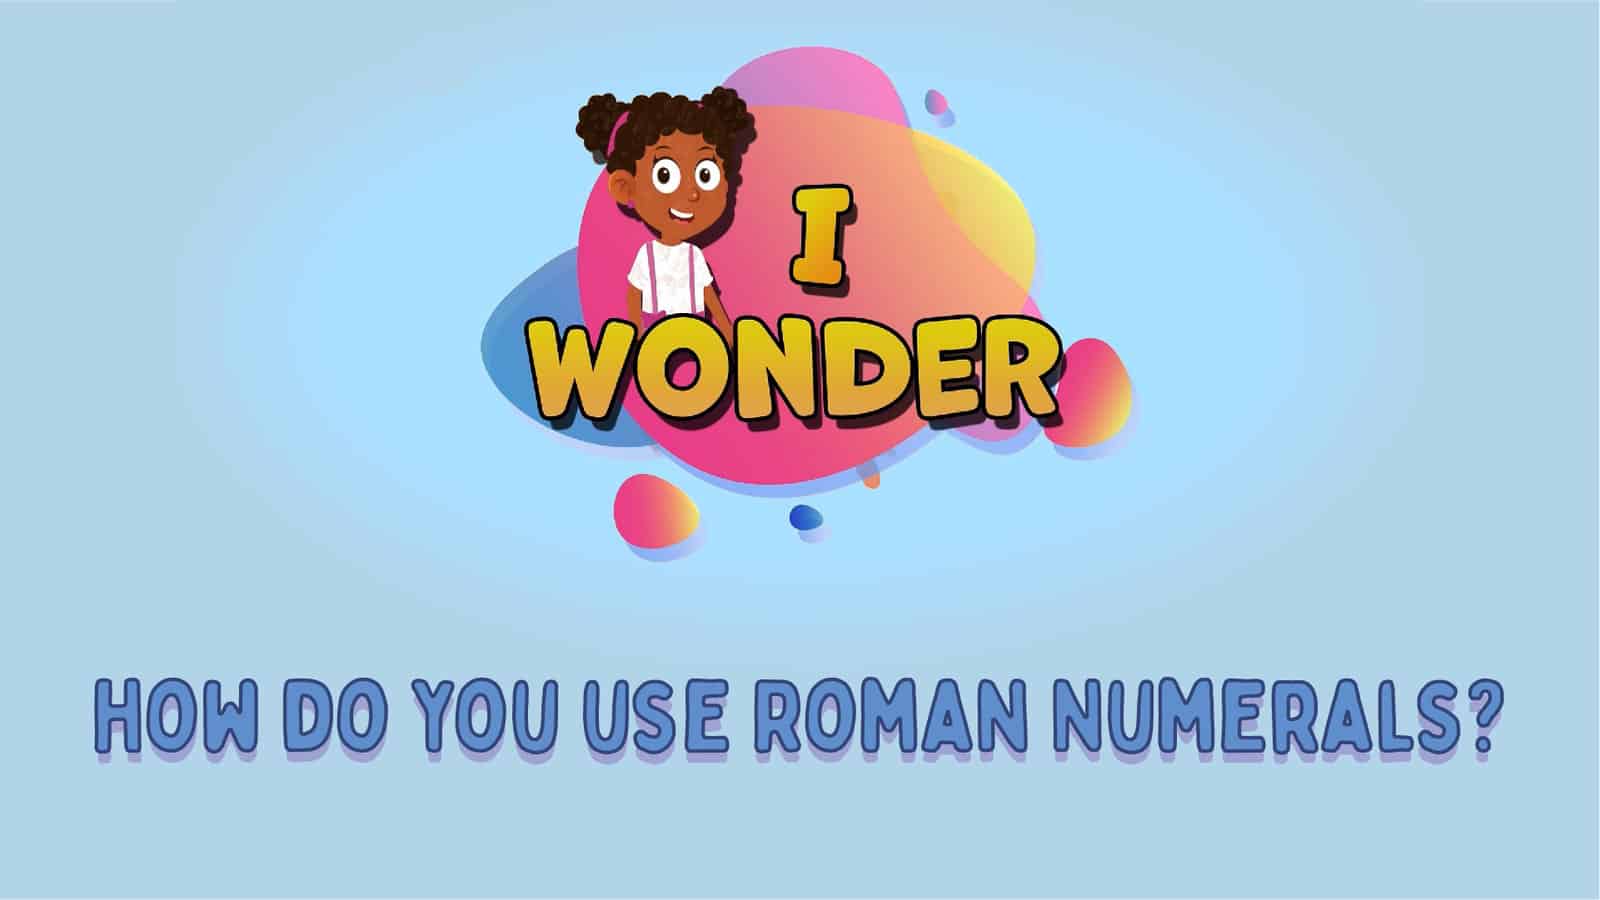 How Do You Use Roman Numerals?